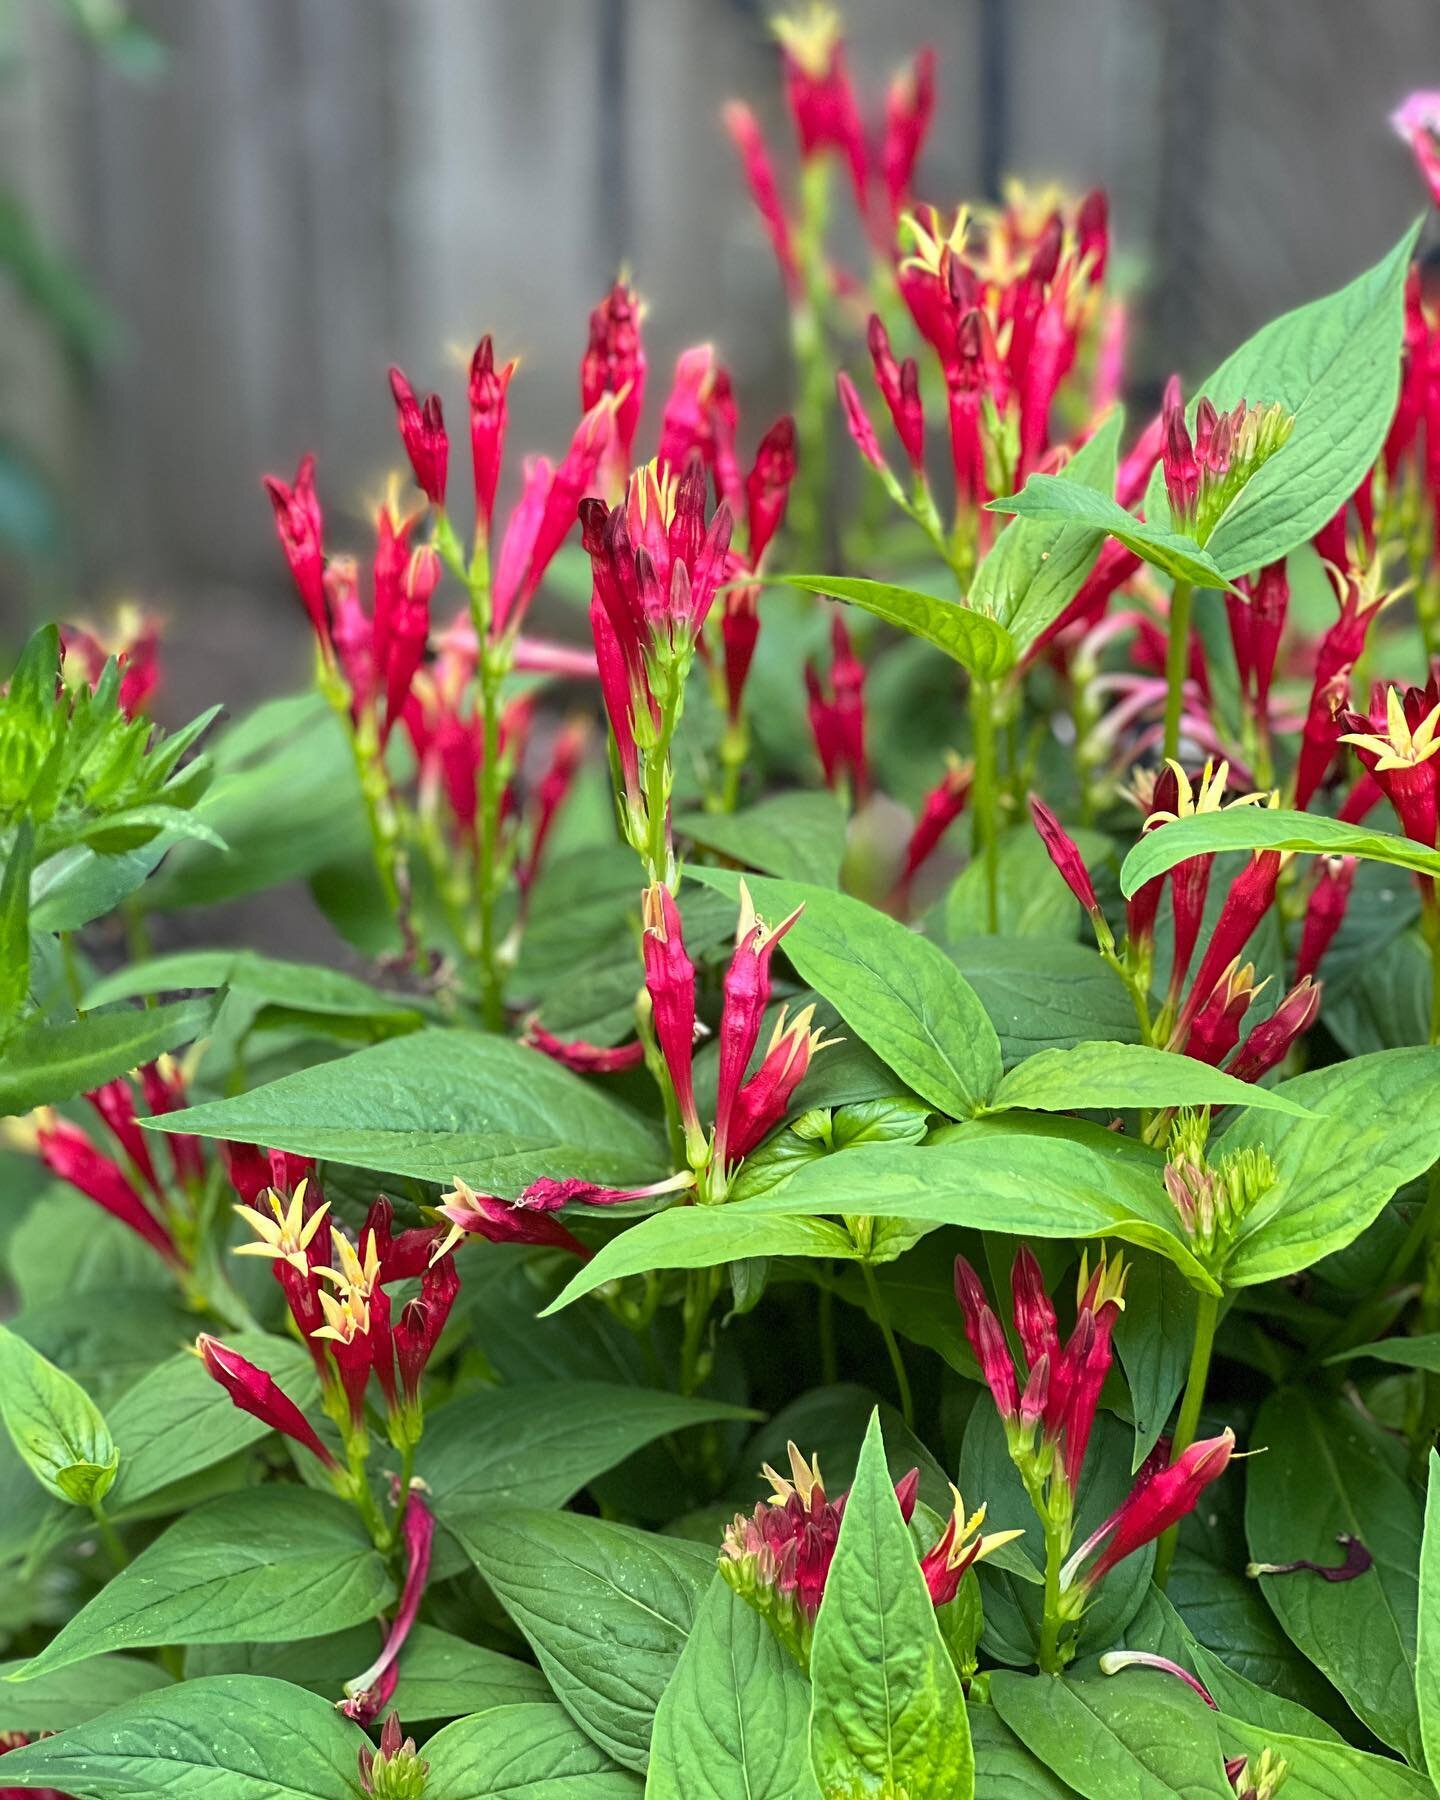 Spigelia marilandica, commonly called Indian pink, is a clump-forming perennial. It flowers in June and grows in partial or full shade.